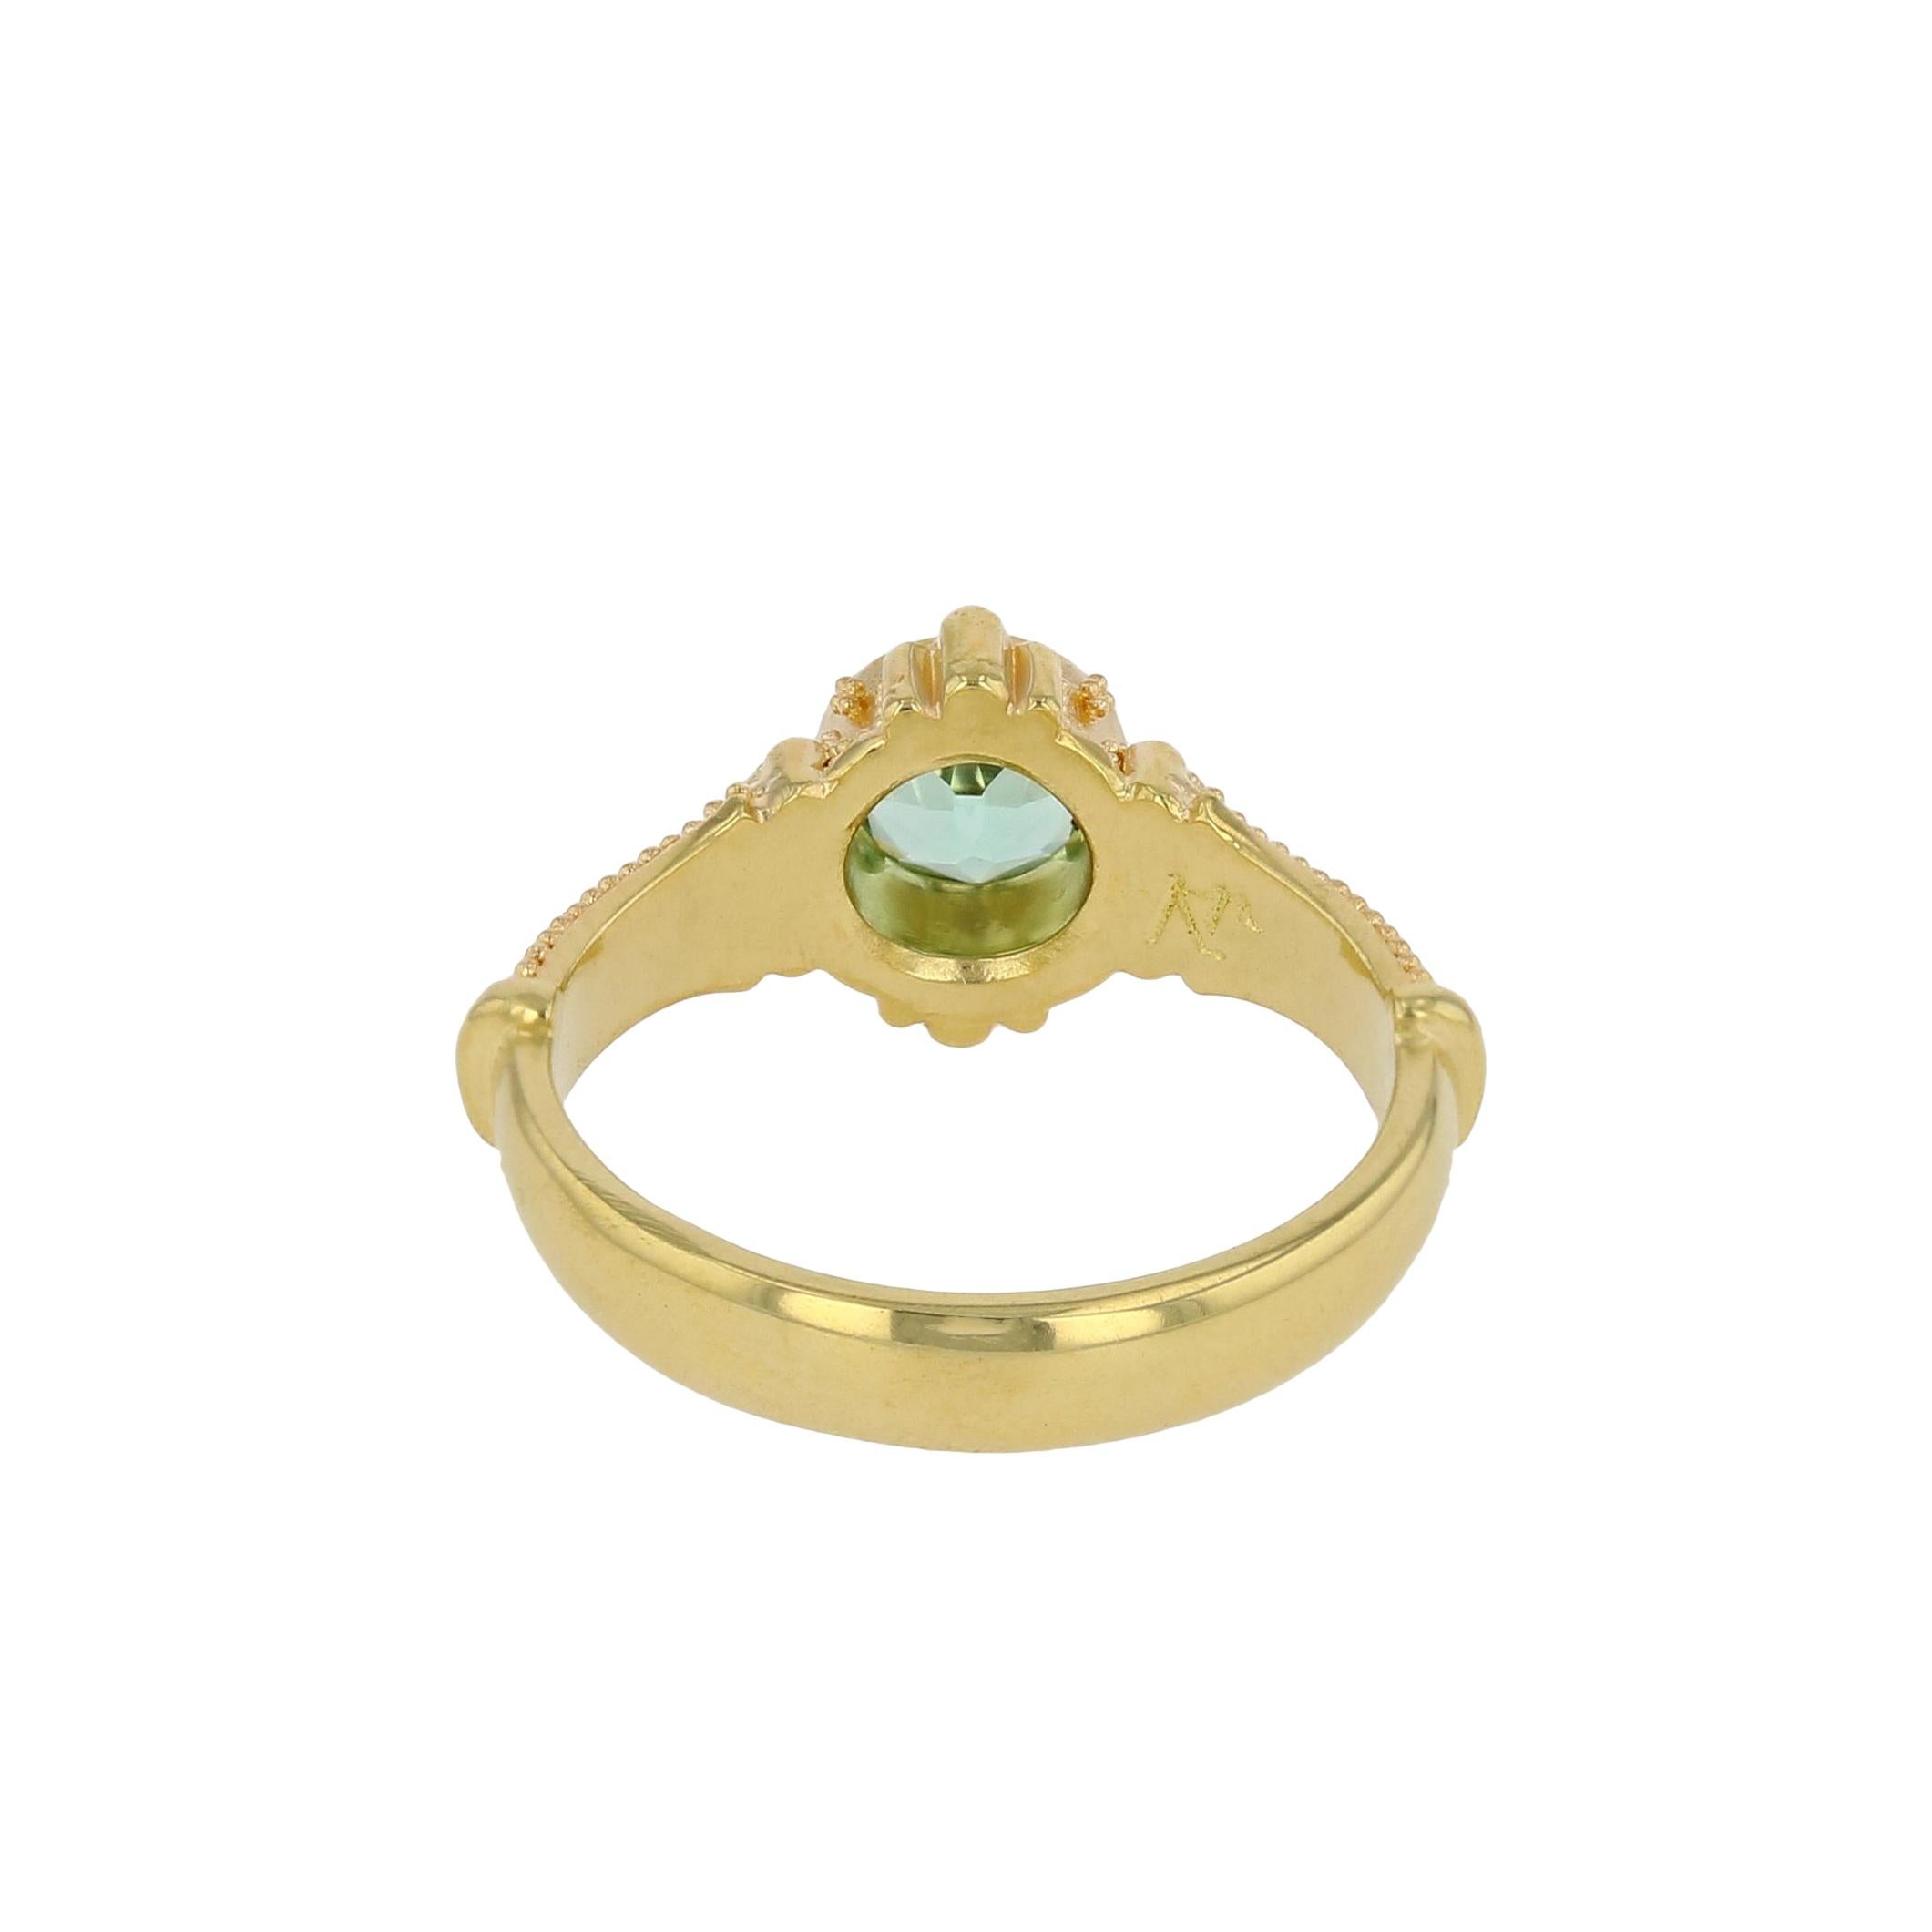 Kent Raible 18 Karat Gold Solitare Ring with Seafoam Tourmaline and Granulation For Sale 2